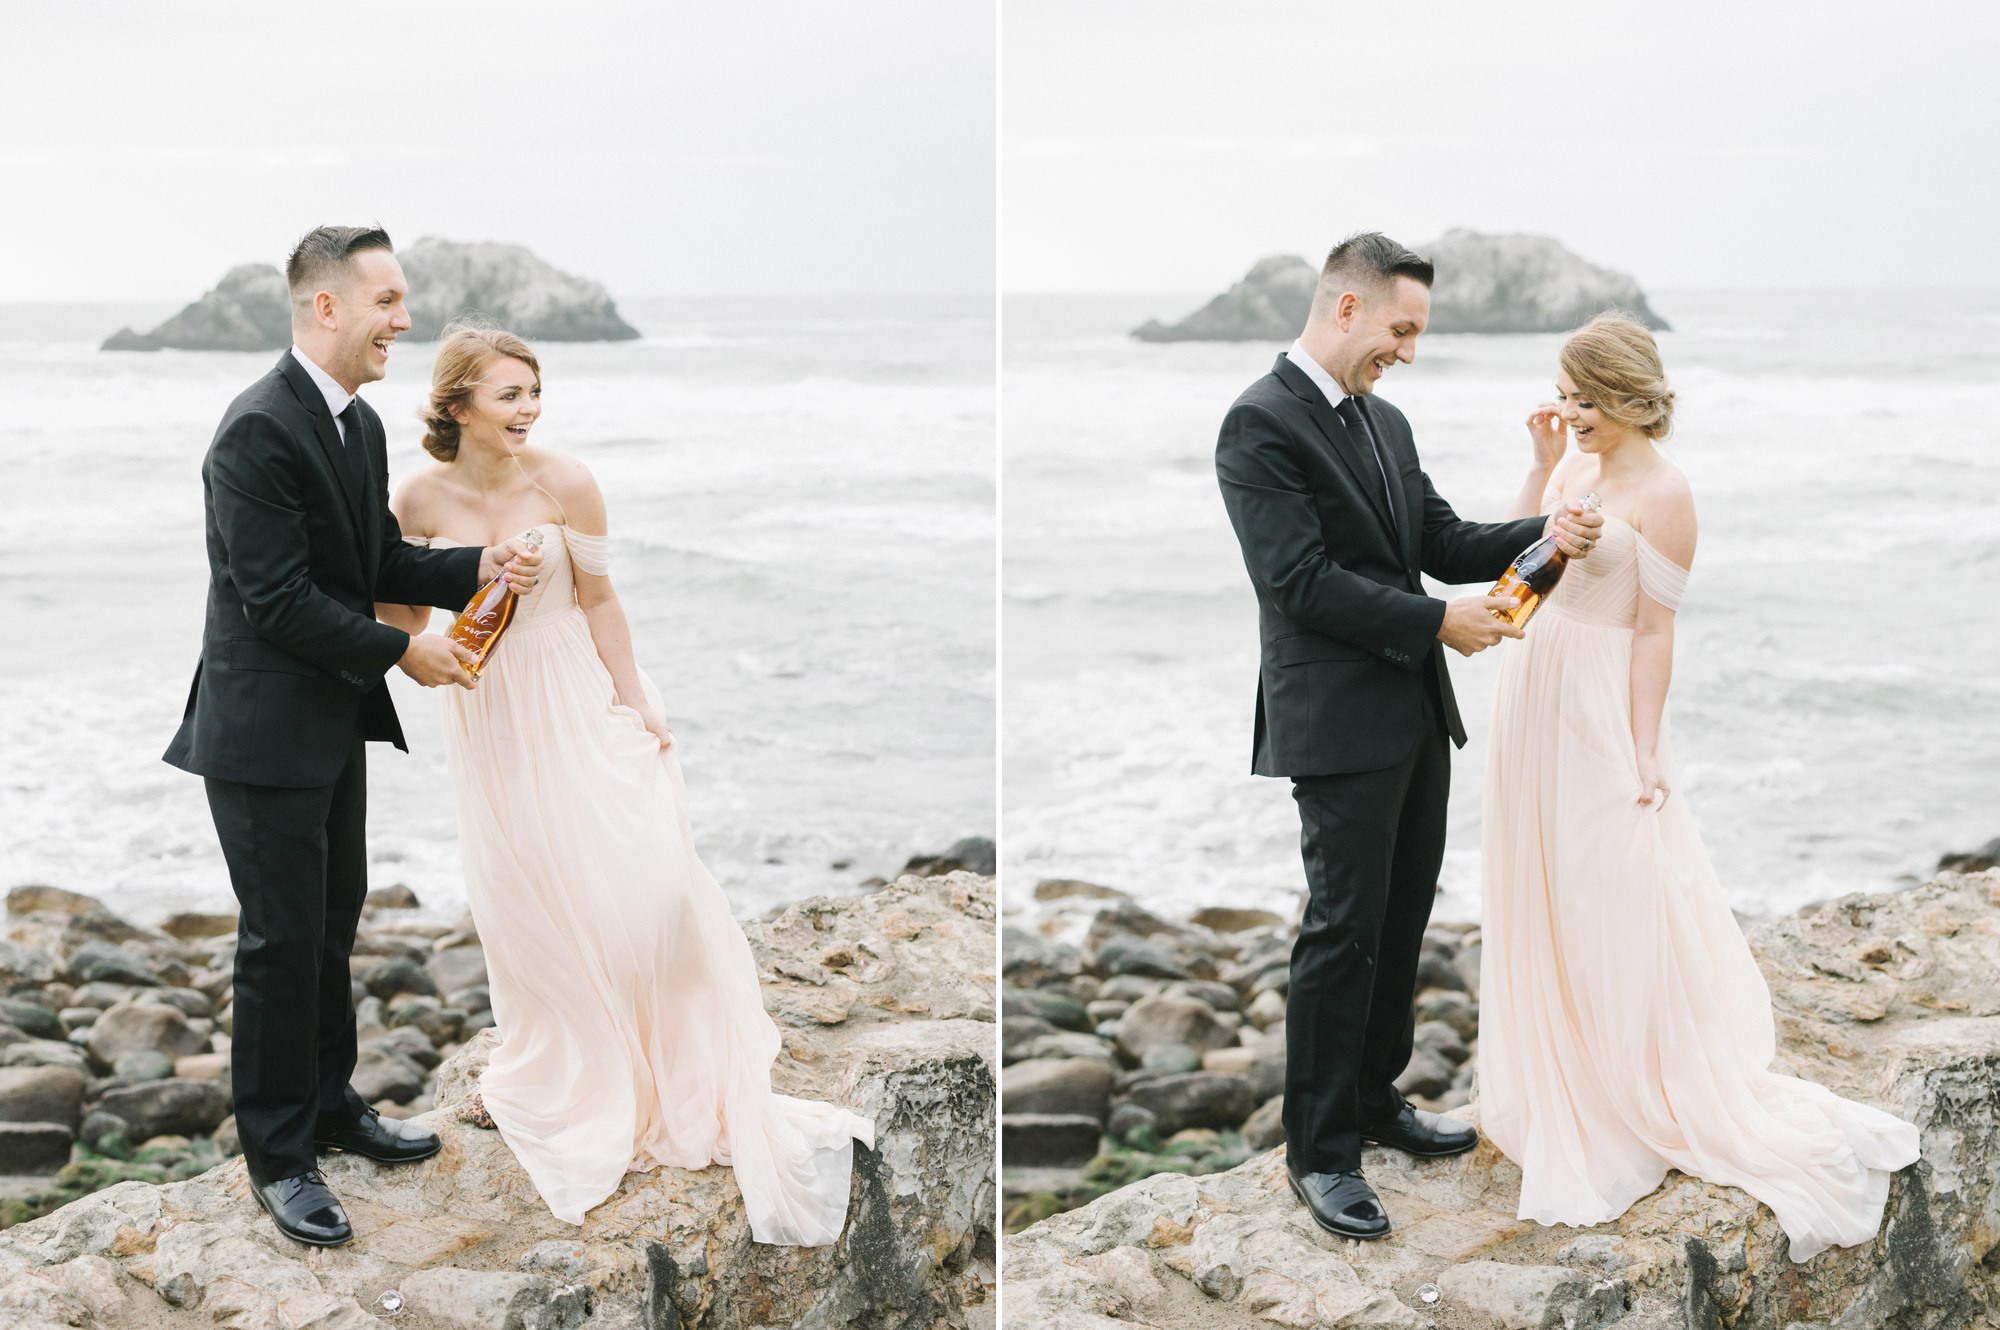 Sutro Baths photography inspiration from SF wedding photographer Tenth & Grace